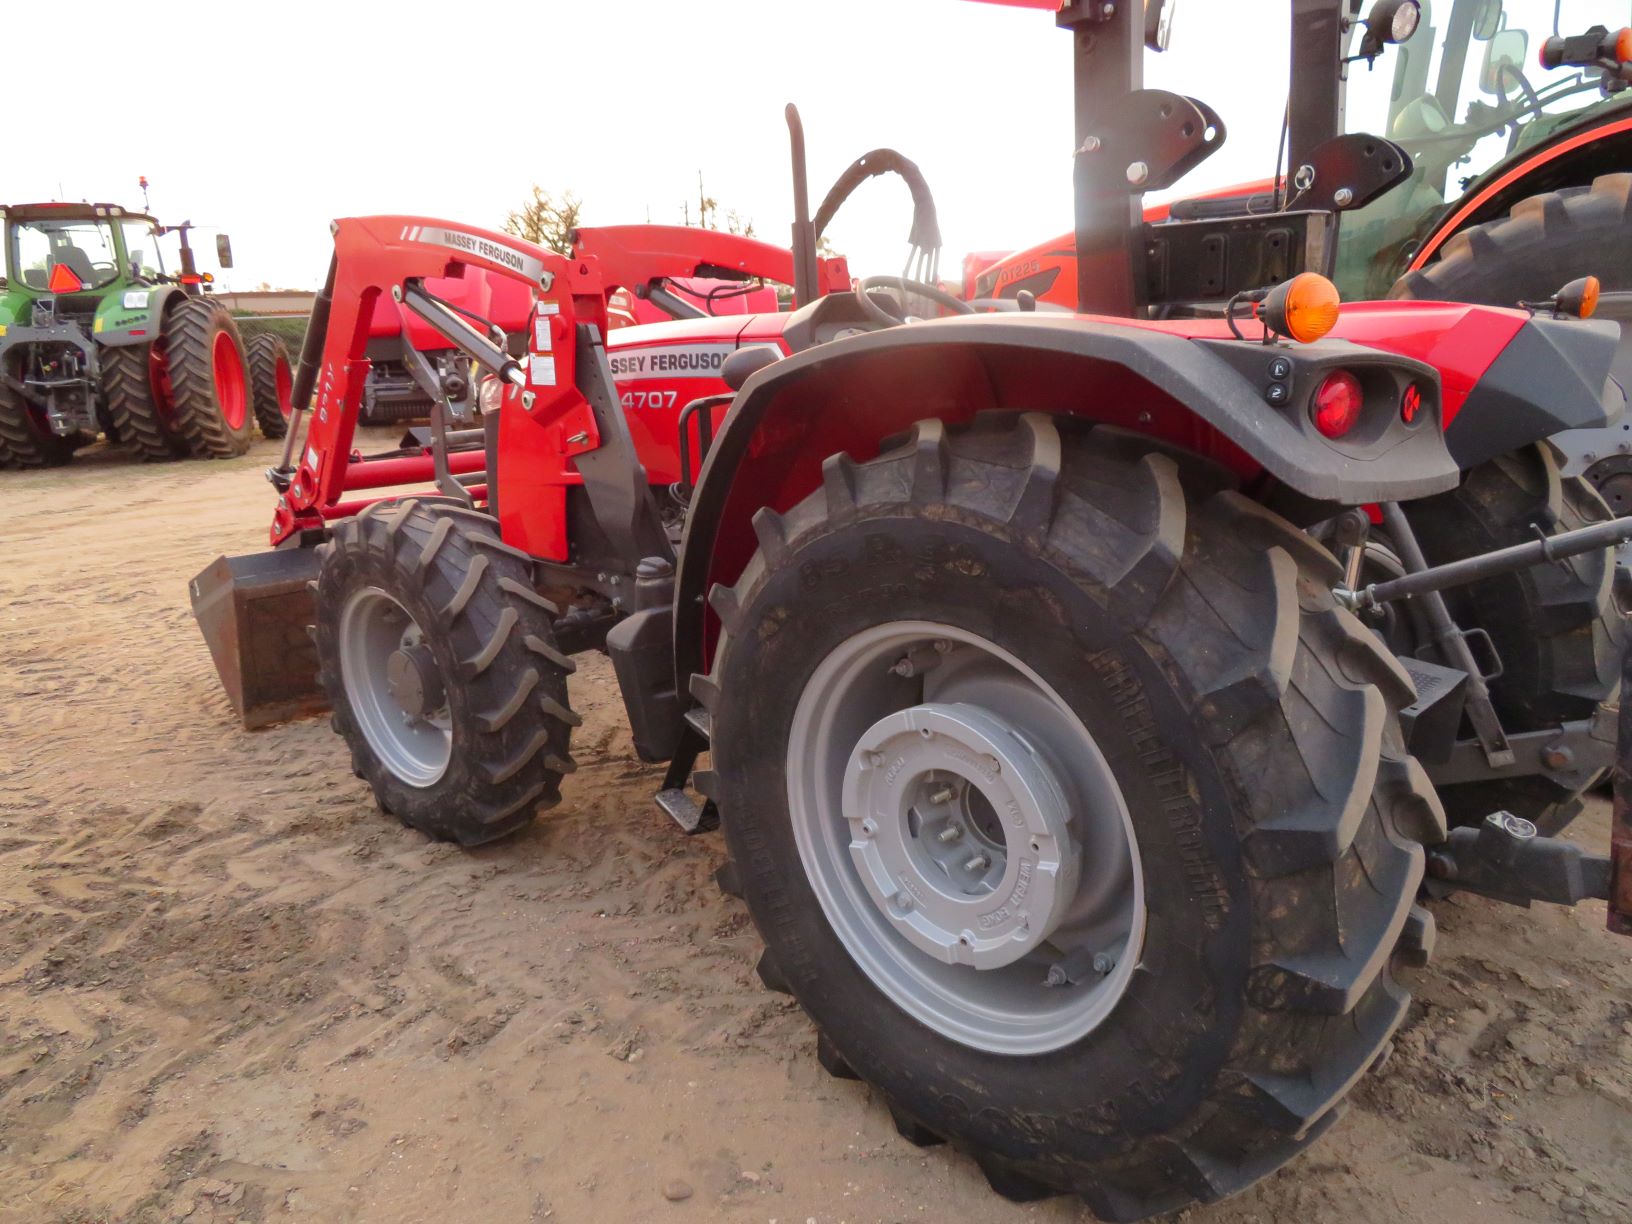 2019 Massey Ferguson 4707 Tractor for sale in Greeley, CO | IronSearch
